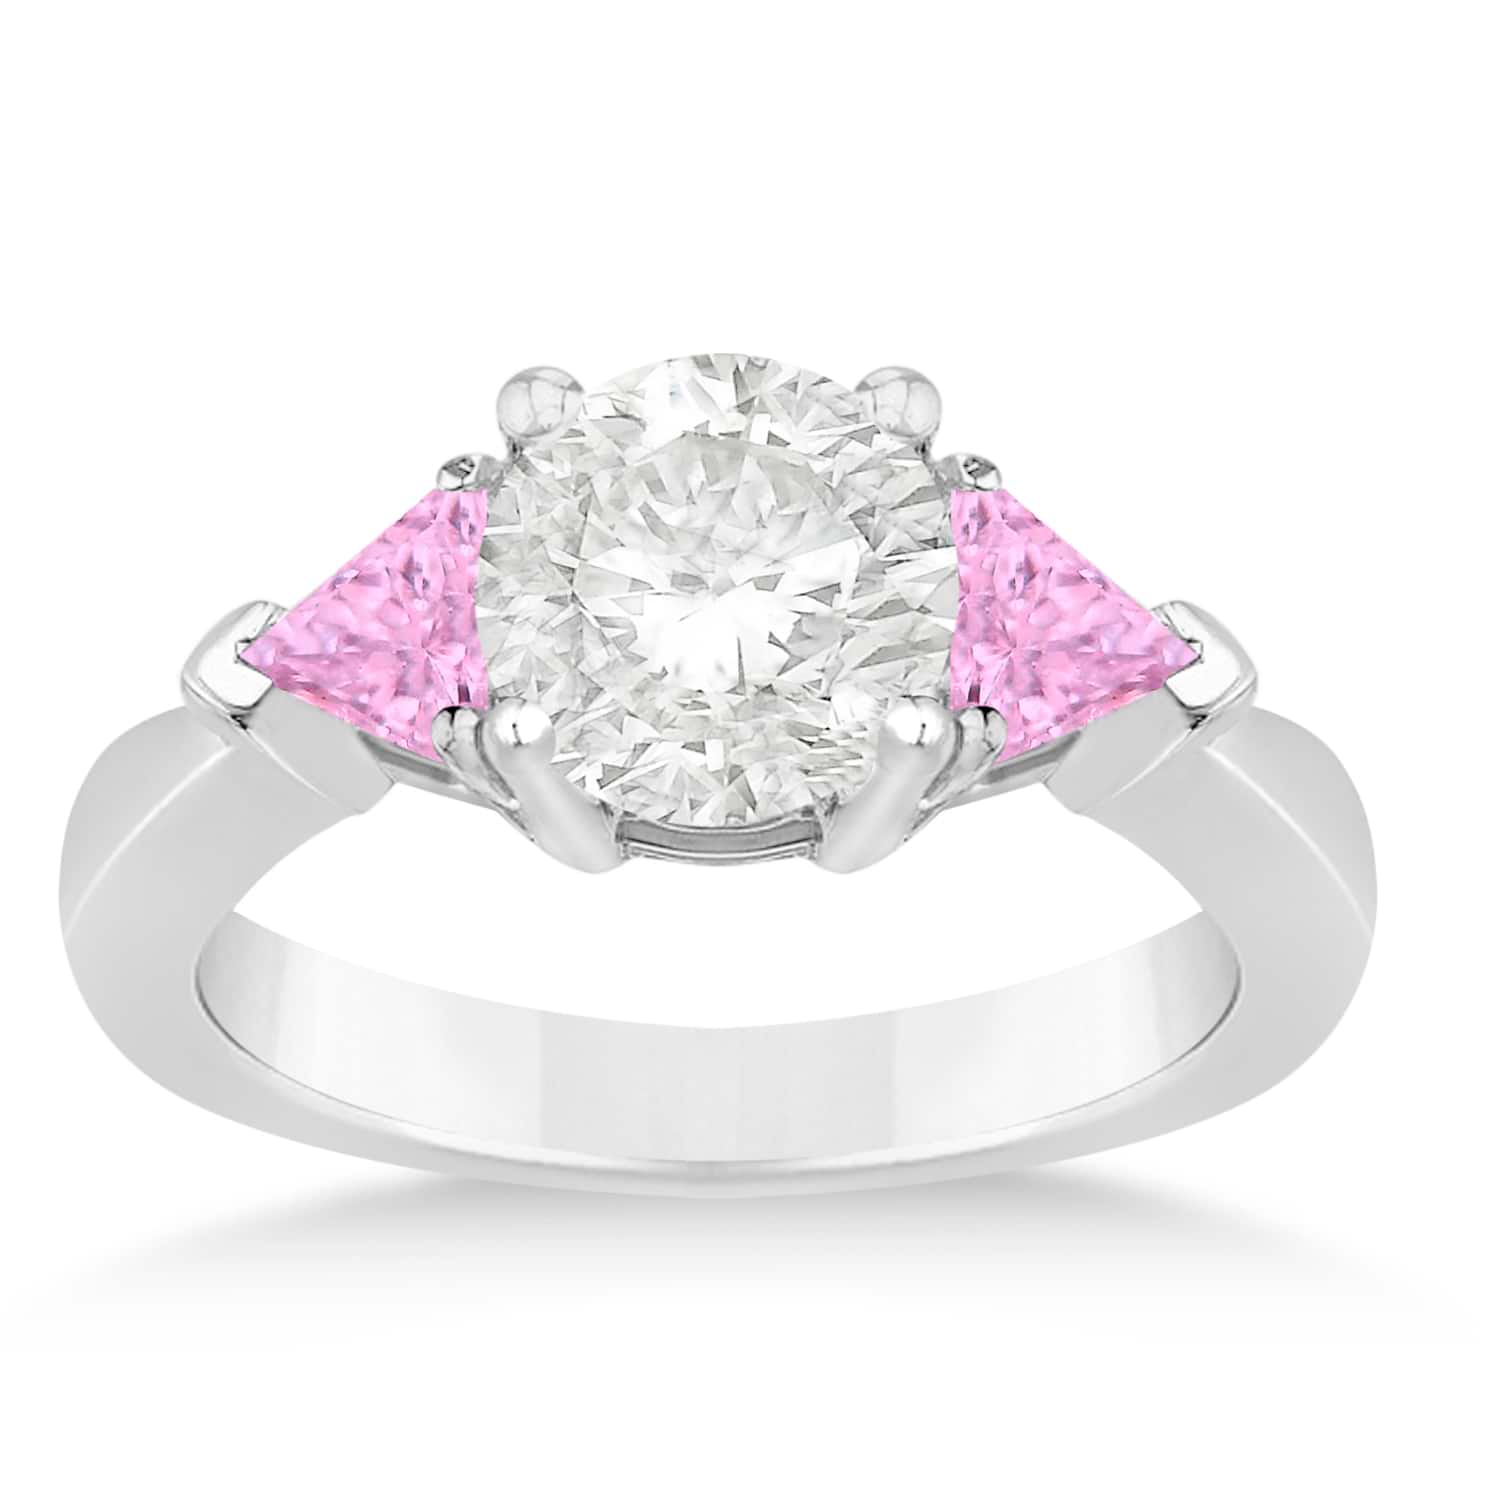 Pink Sapphire Three Stone Trilliant Engagement Ring 18k White Gold (0.70ct)